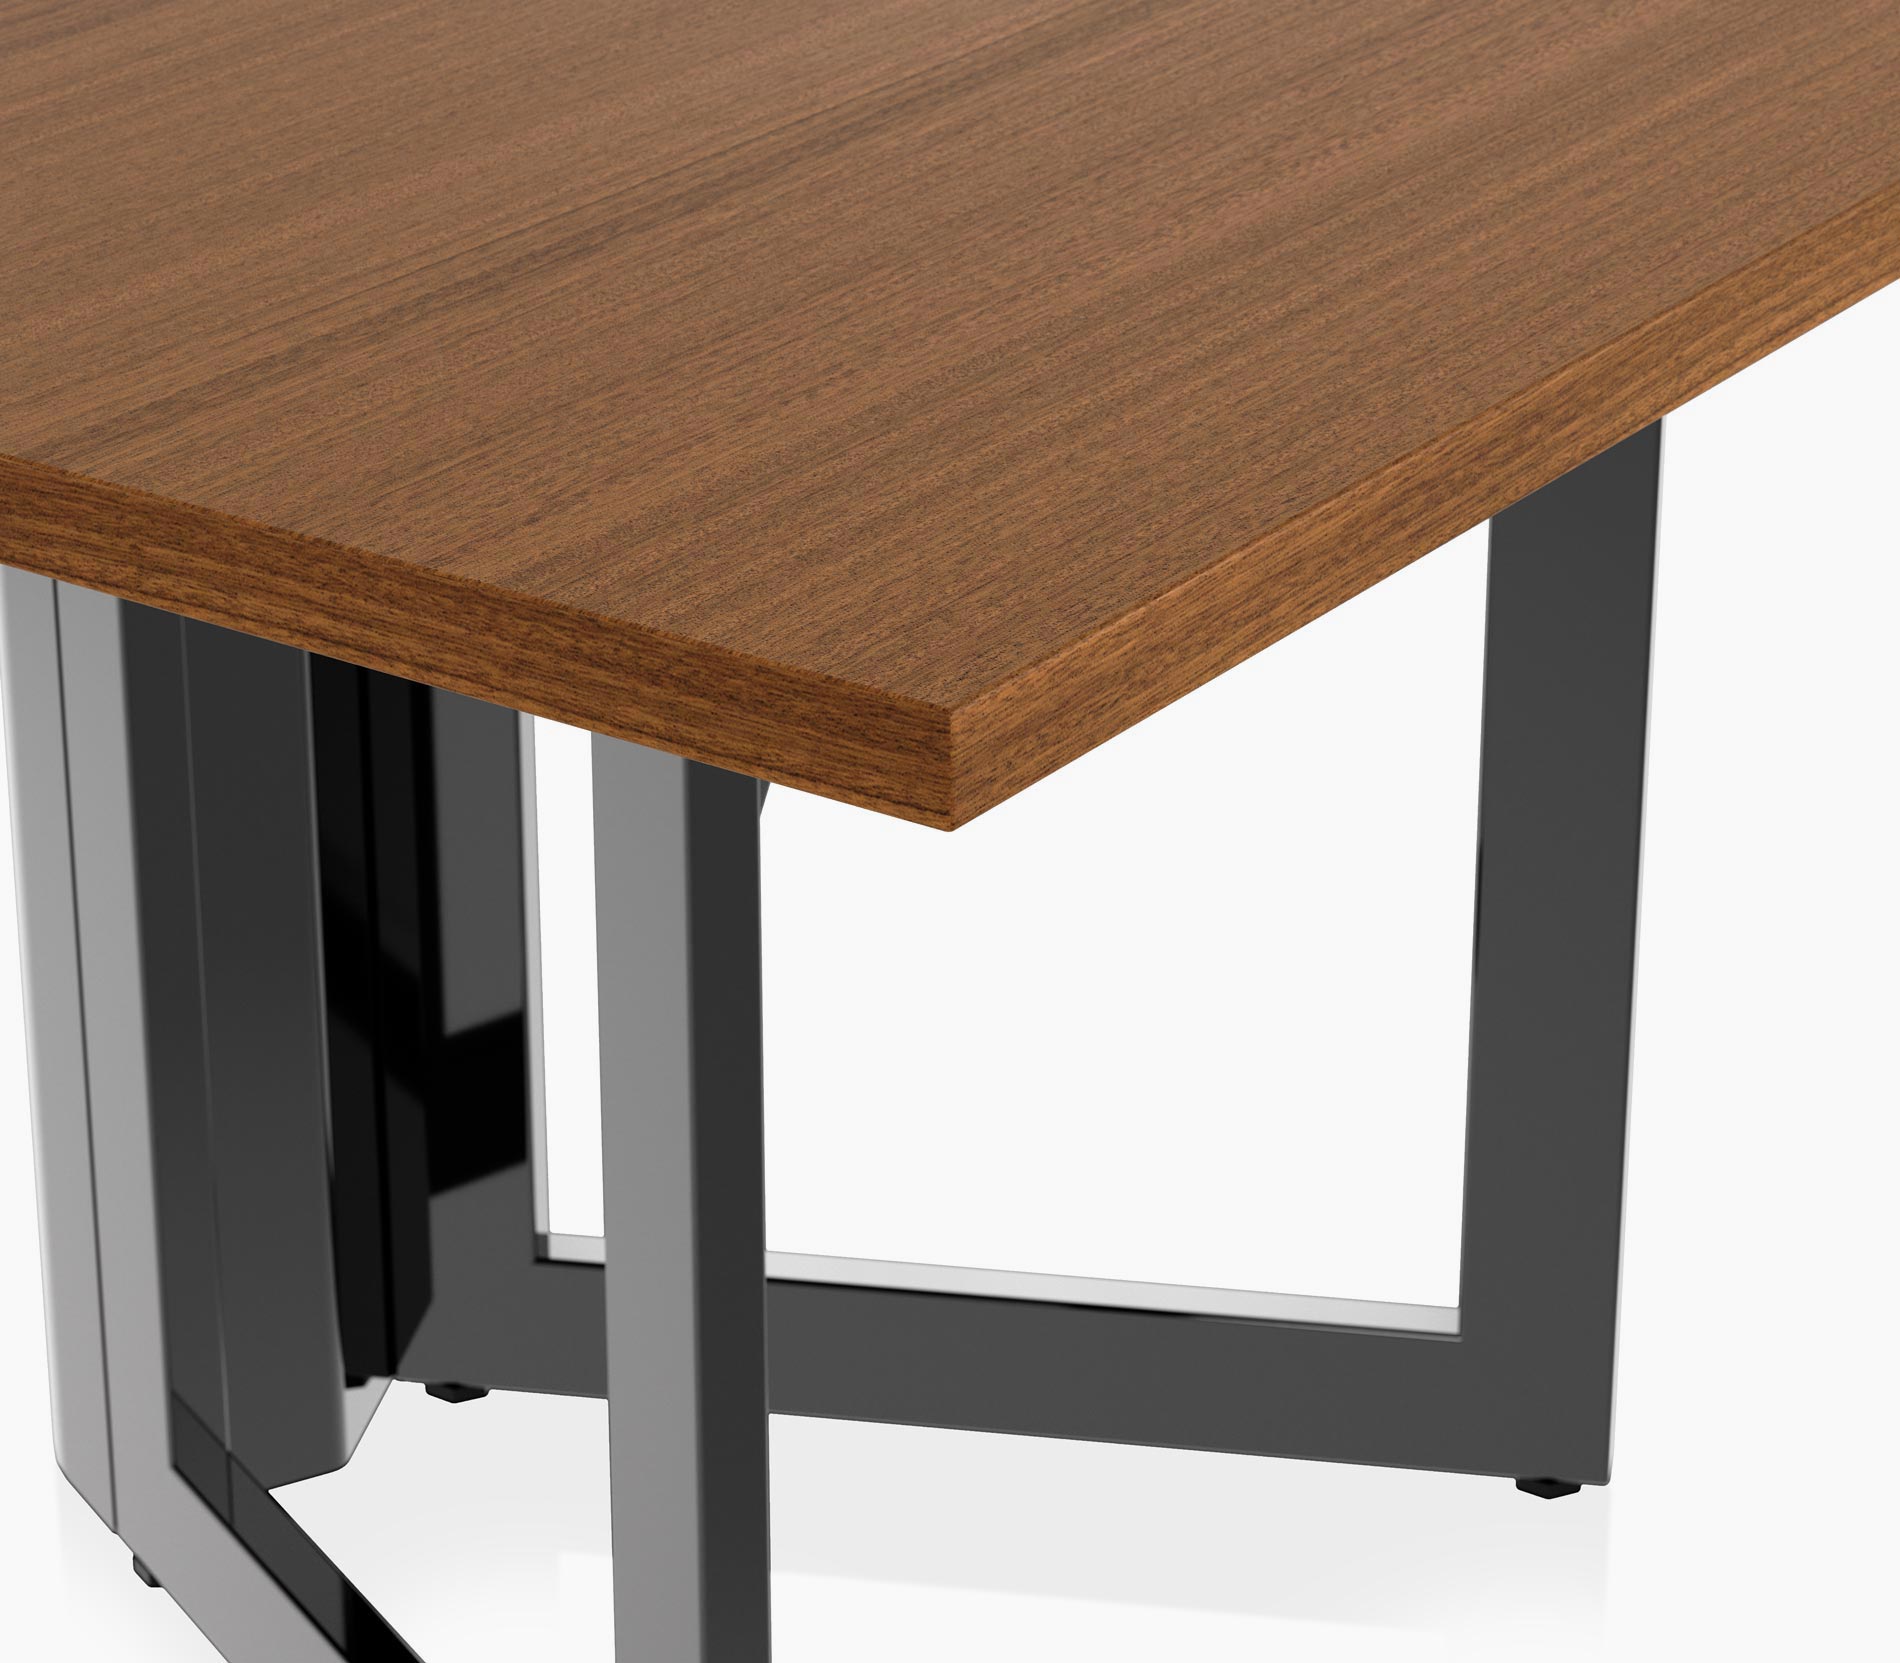 Edge detail on a Highline Vector Conference Table in natural quarter cut walnut with a jet black base